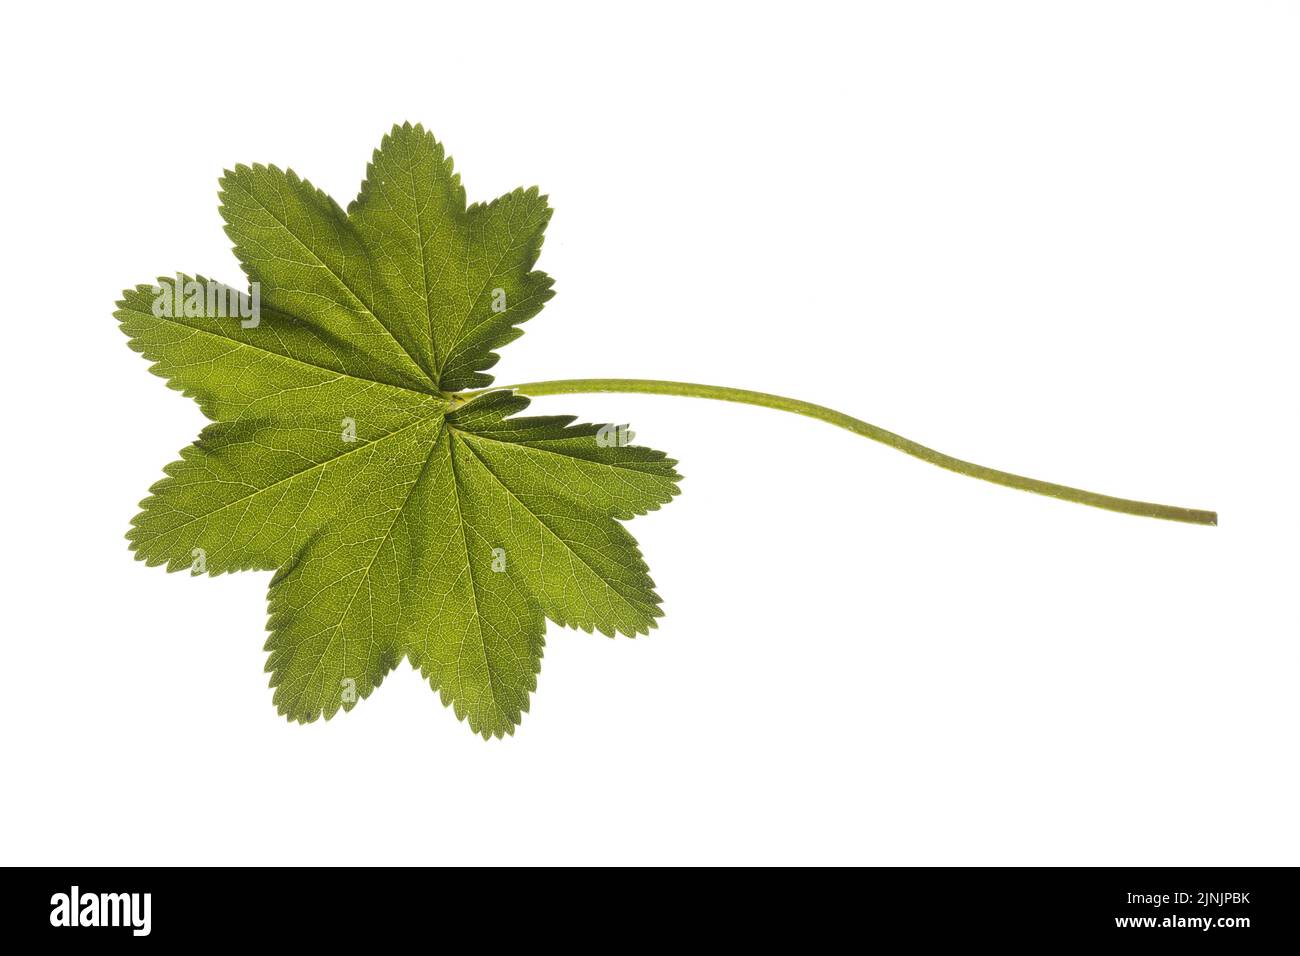 common lady's-mantle (Alchemilla vulgaris agg.), leaf, cut-out Stock Photo